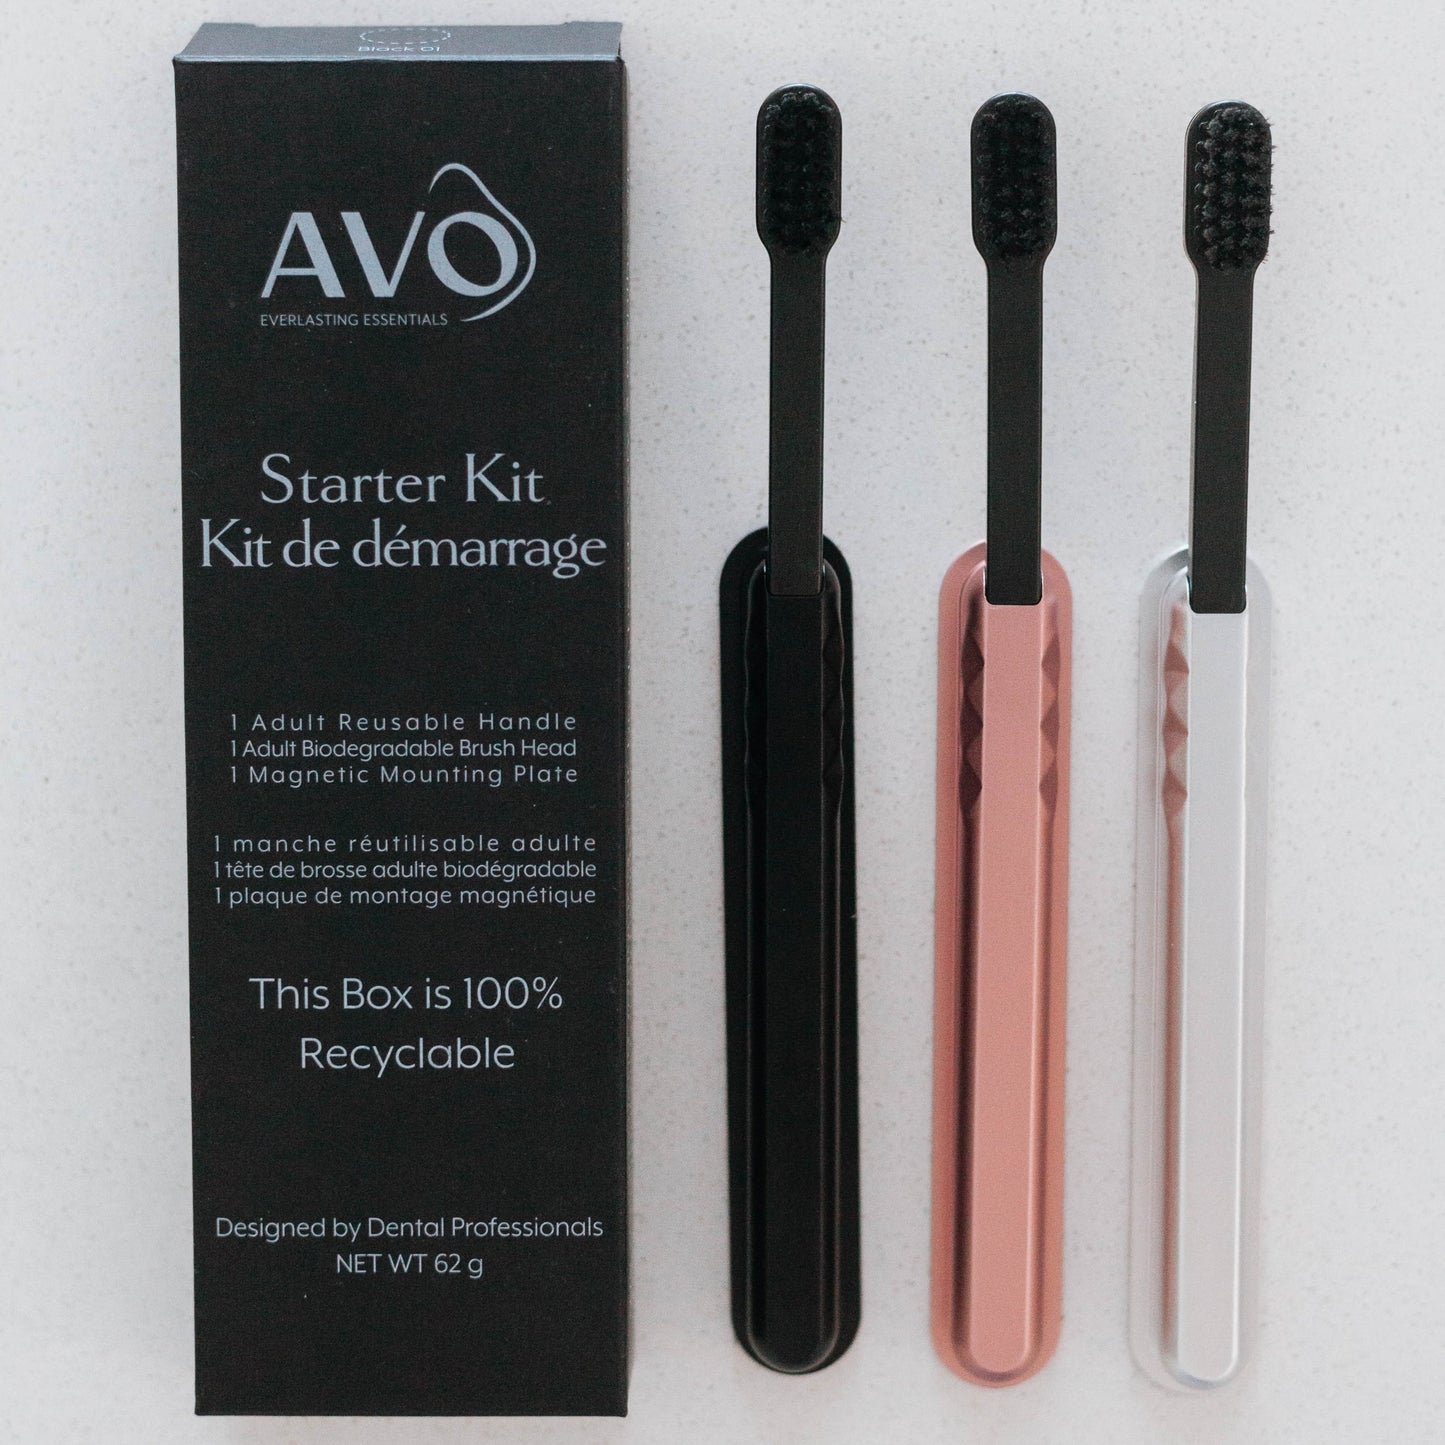 Starter Kit Black, Rose Gold, Silver Aluminum Brush Handle and Biodegradable Brush presented with Magnetic Strip and Packaging